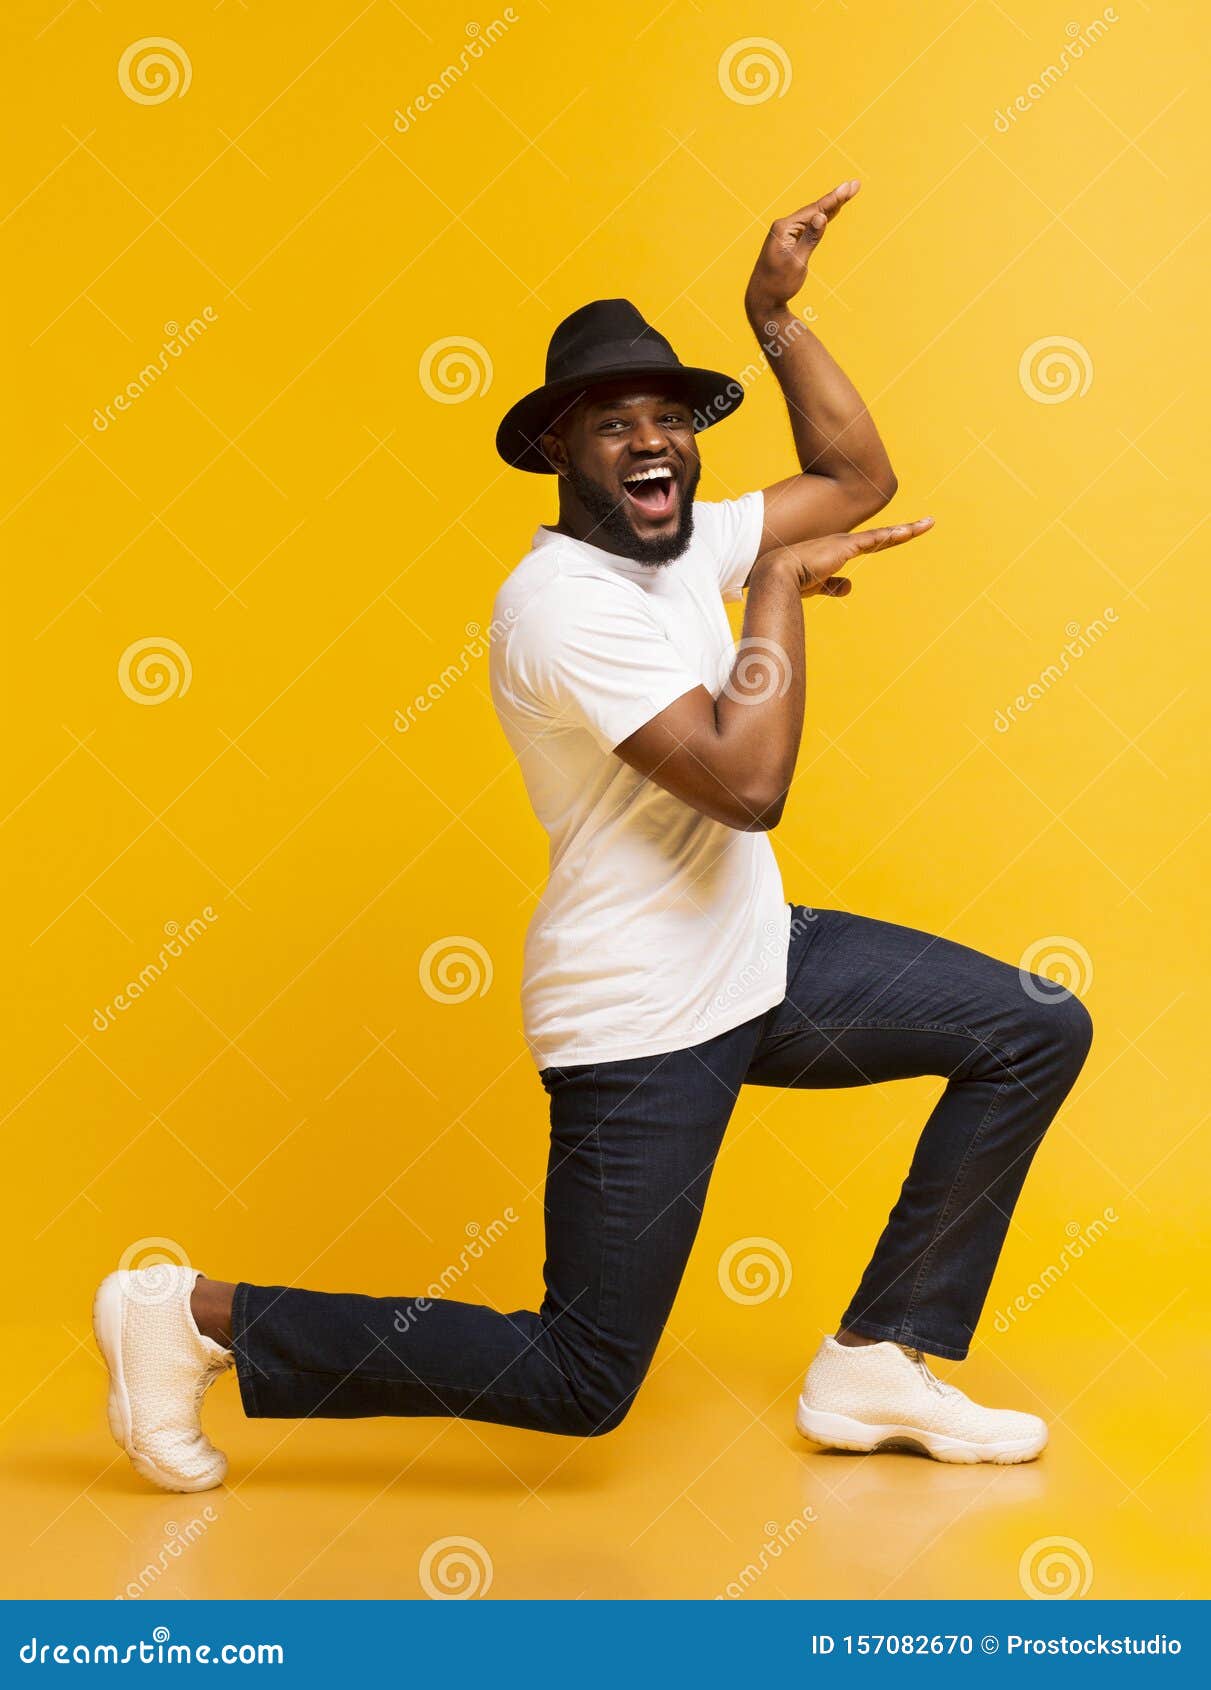 Funny African Guy Dancing in Egypt Style on Yellow Background Stock ...